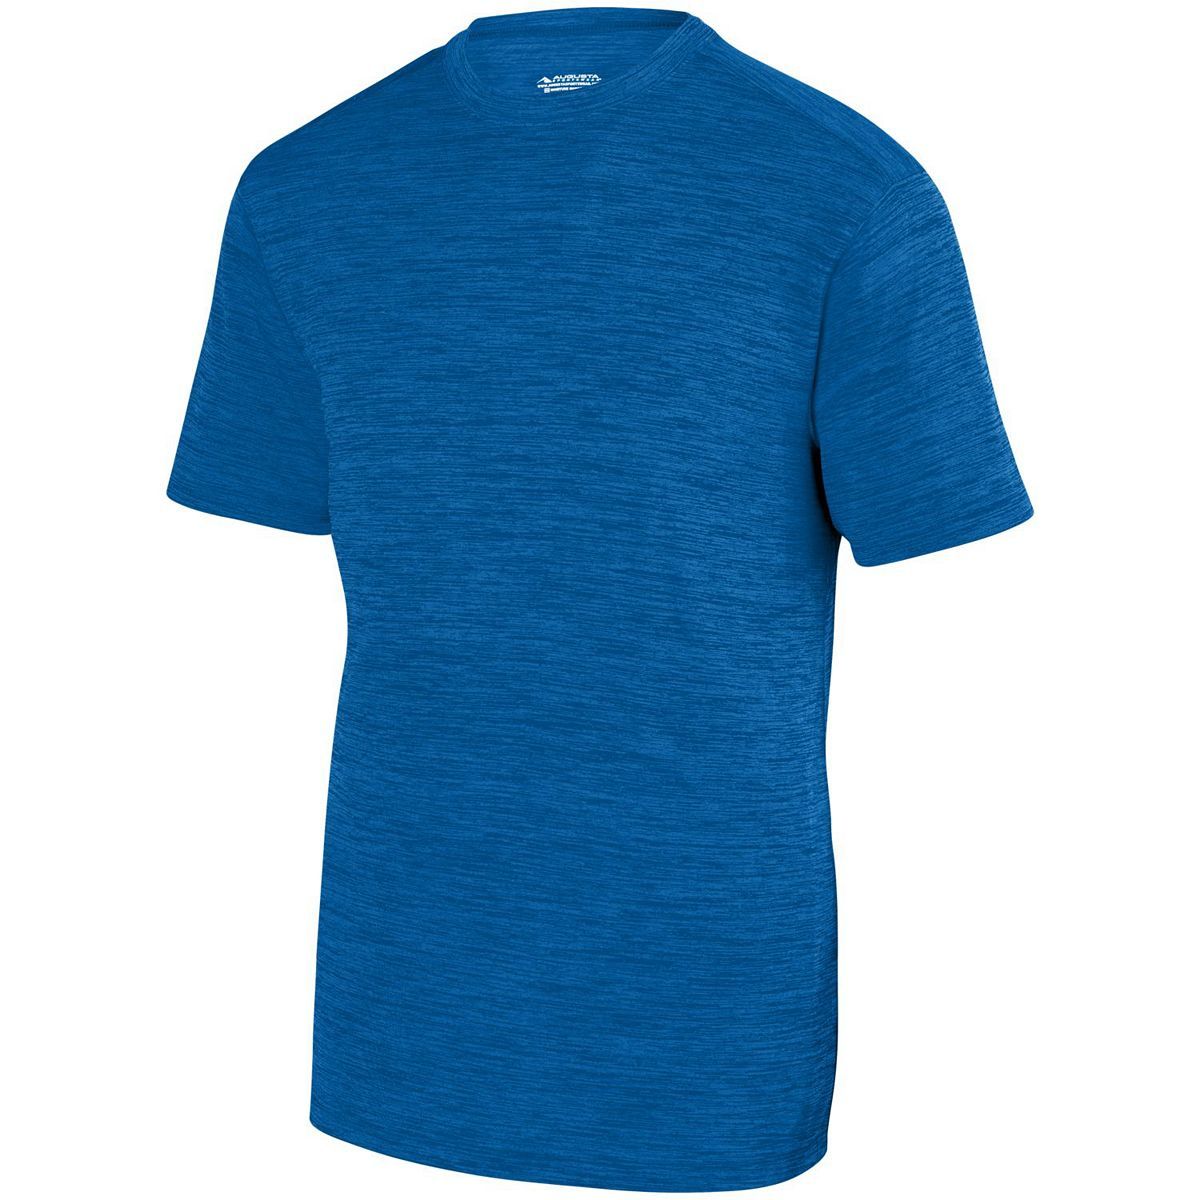 Augusta Sportswear Youth Shadow Tonal Heather Training Tee in Royal  -Part of the Youth, Youth-Tee-Shirt, T-Shirts, Augusta-Products, Shirts, Tonal-Fleece-Collection product lines at KanaleyCreations.com